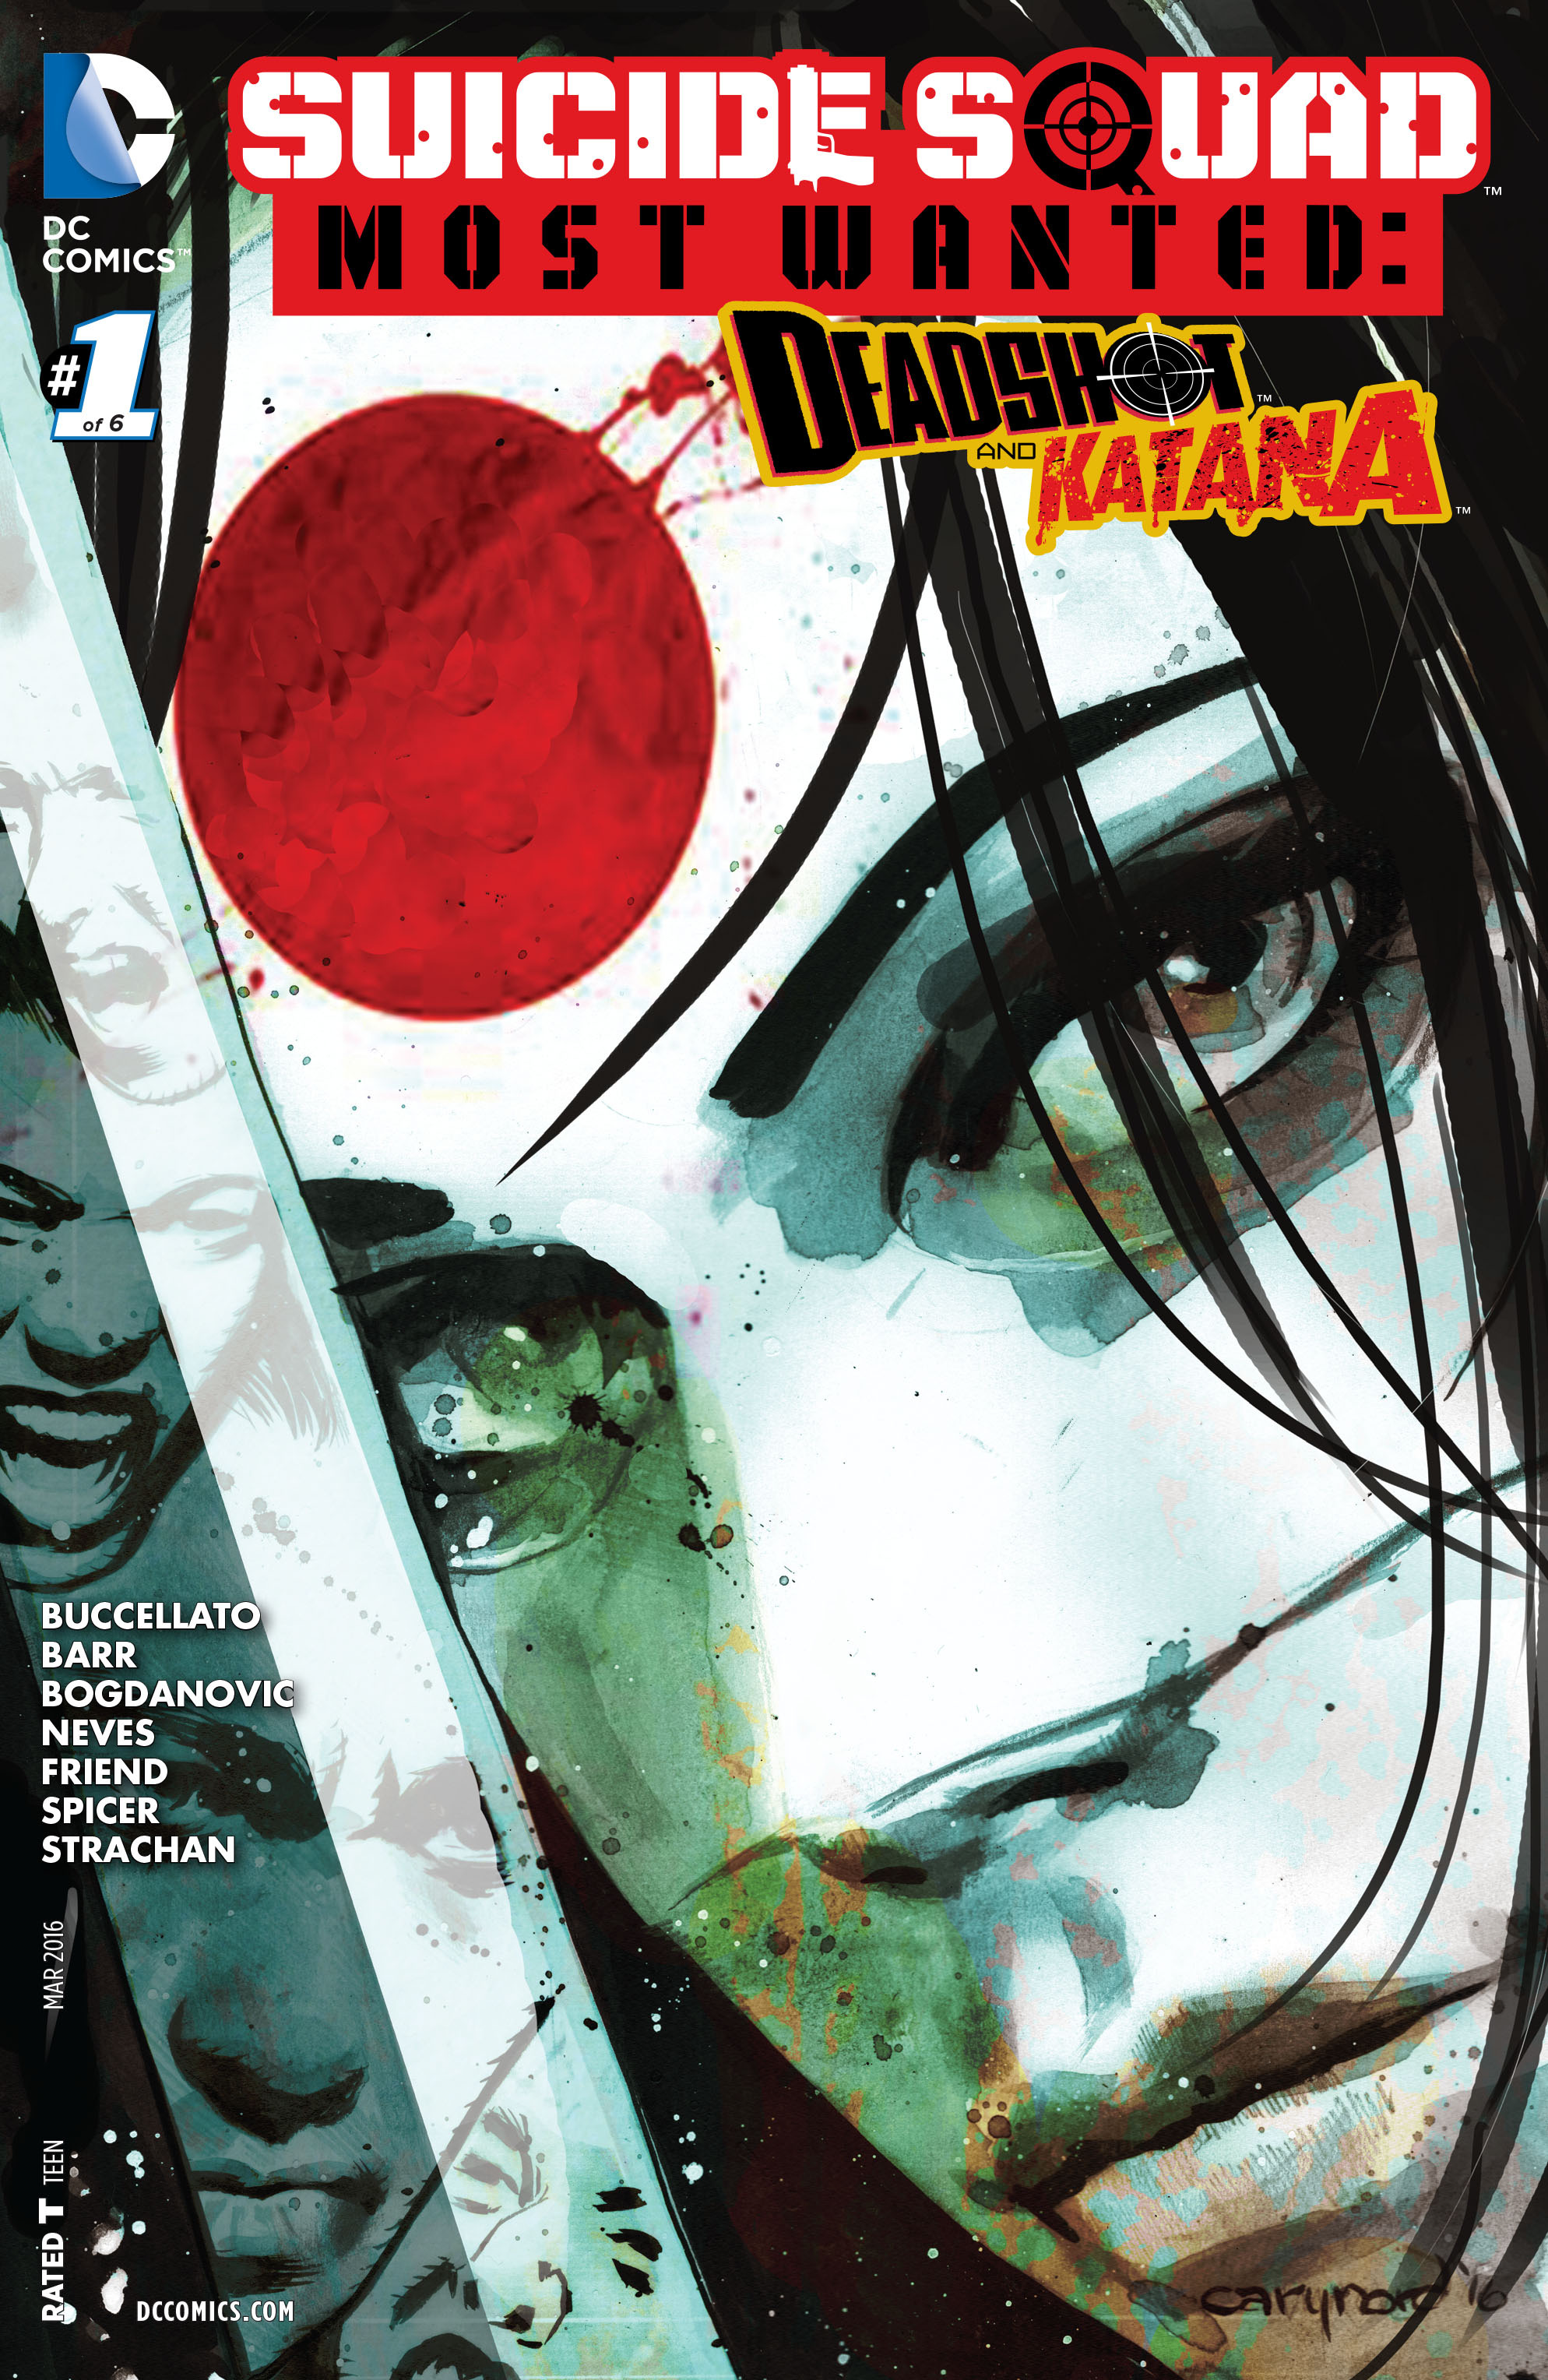 Read online Suicide Squad Most Wanted: Deadshot & Katana comic -  Issue #1 - 3